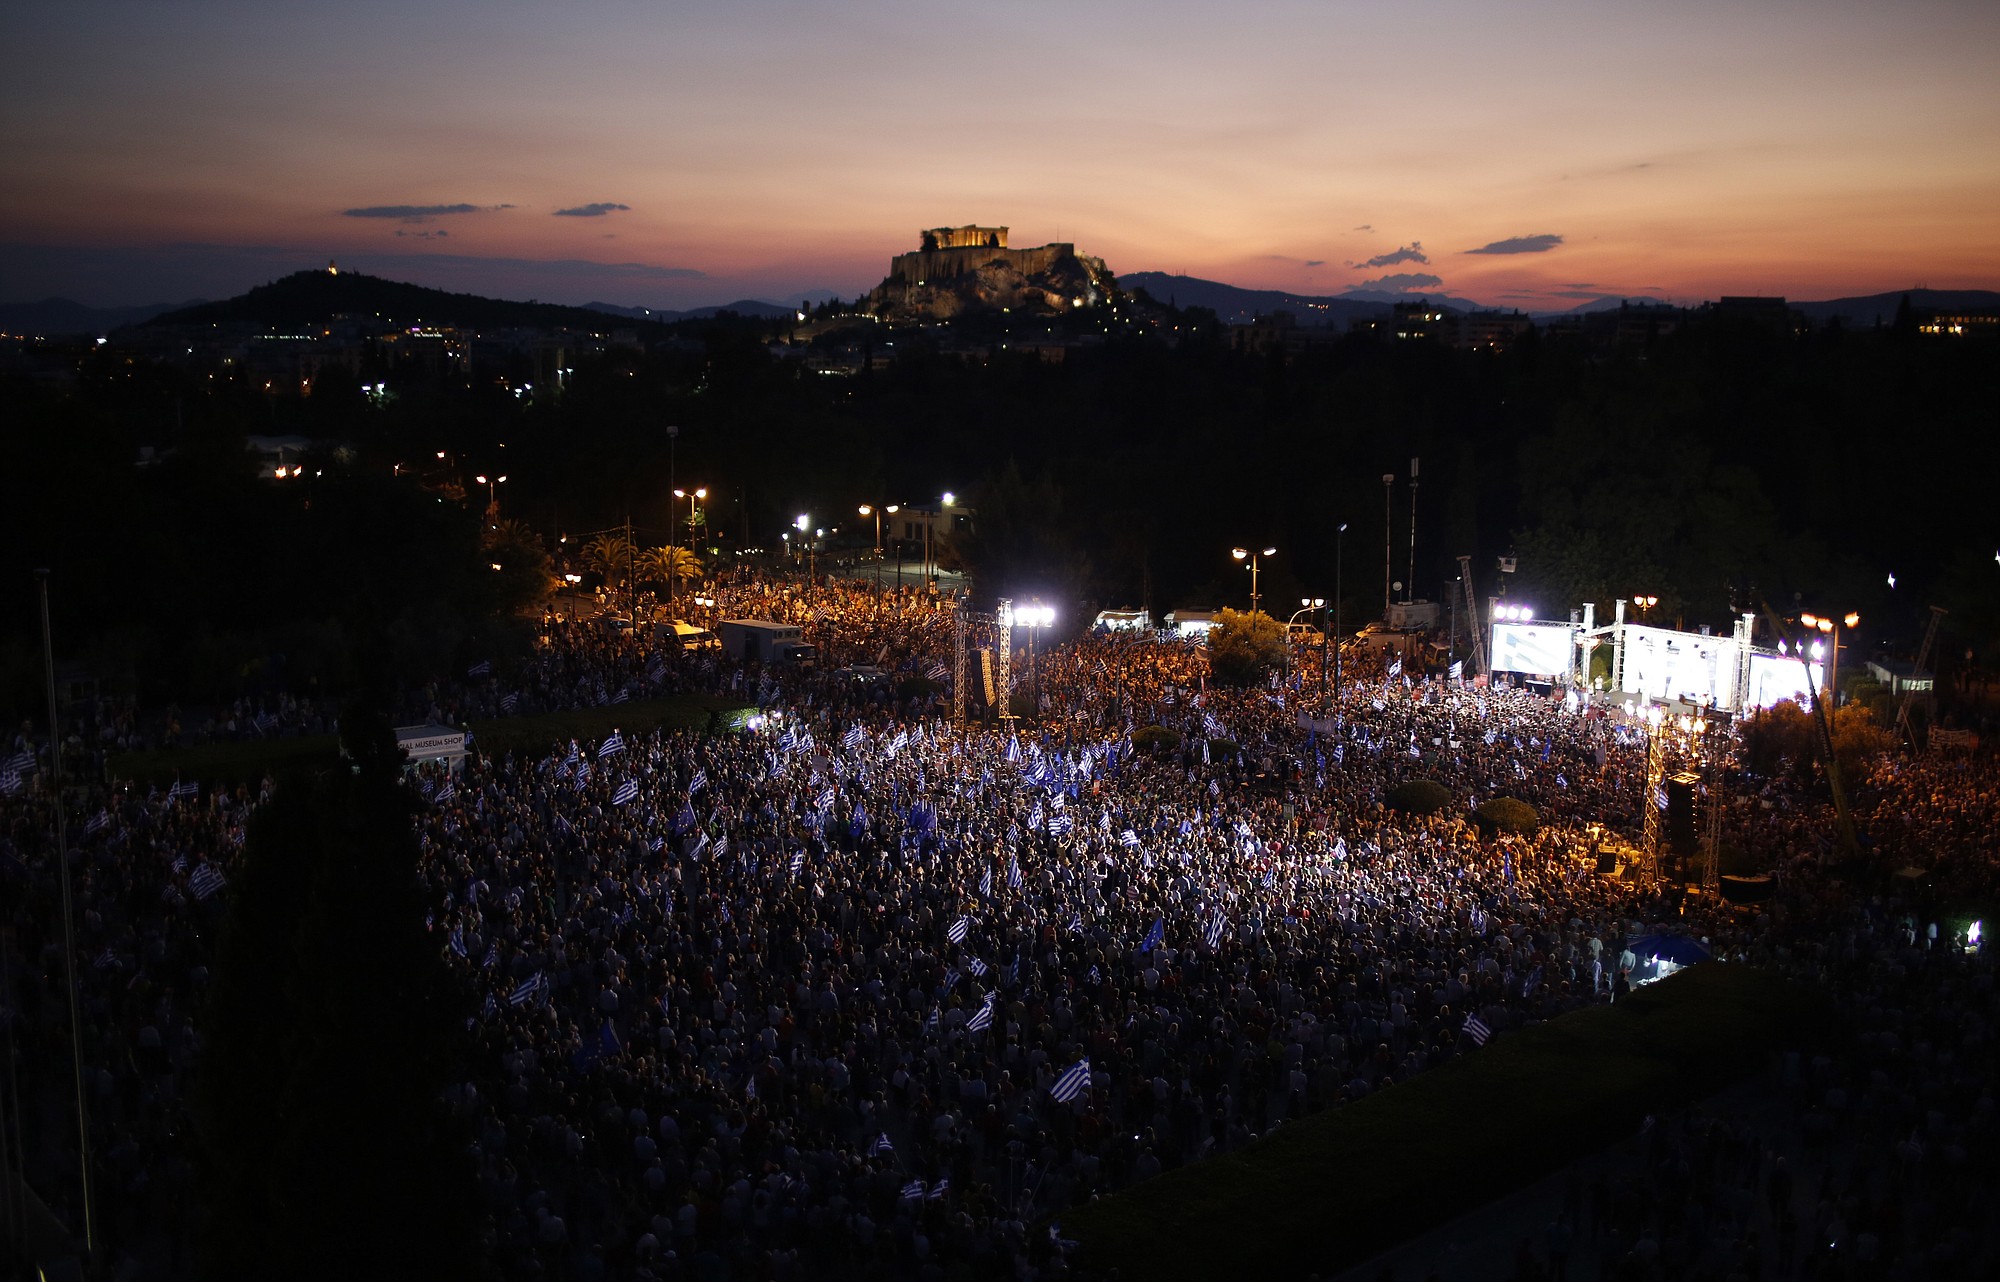 Demonstrators gather during a rally organized by supporters of the Yes vote as the ancient Acropolis hill is seen in the background in Athens, Friday, July 3, 2015. A new opinion poll shows a dead heat in Greece's referendum campaign with just two days to go before Sunday's vote on whether Greeks should accept more austerity in return for bailout loans.